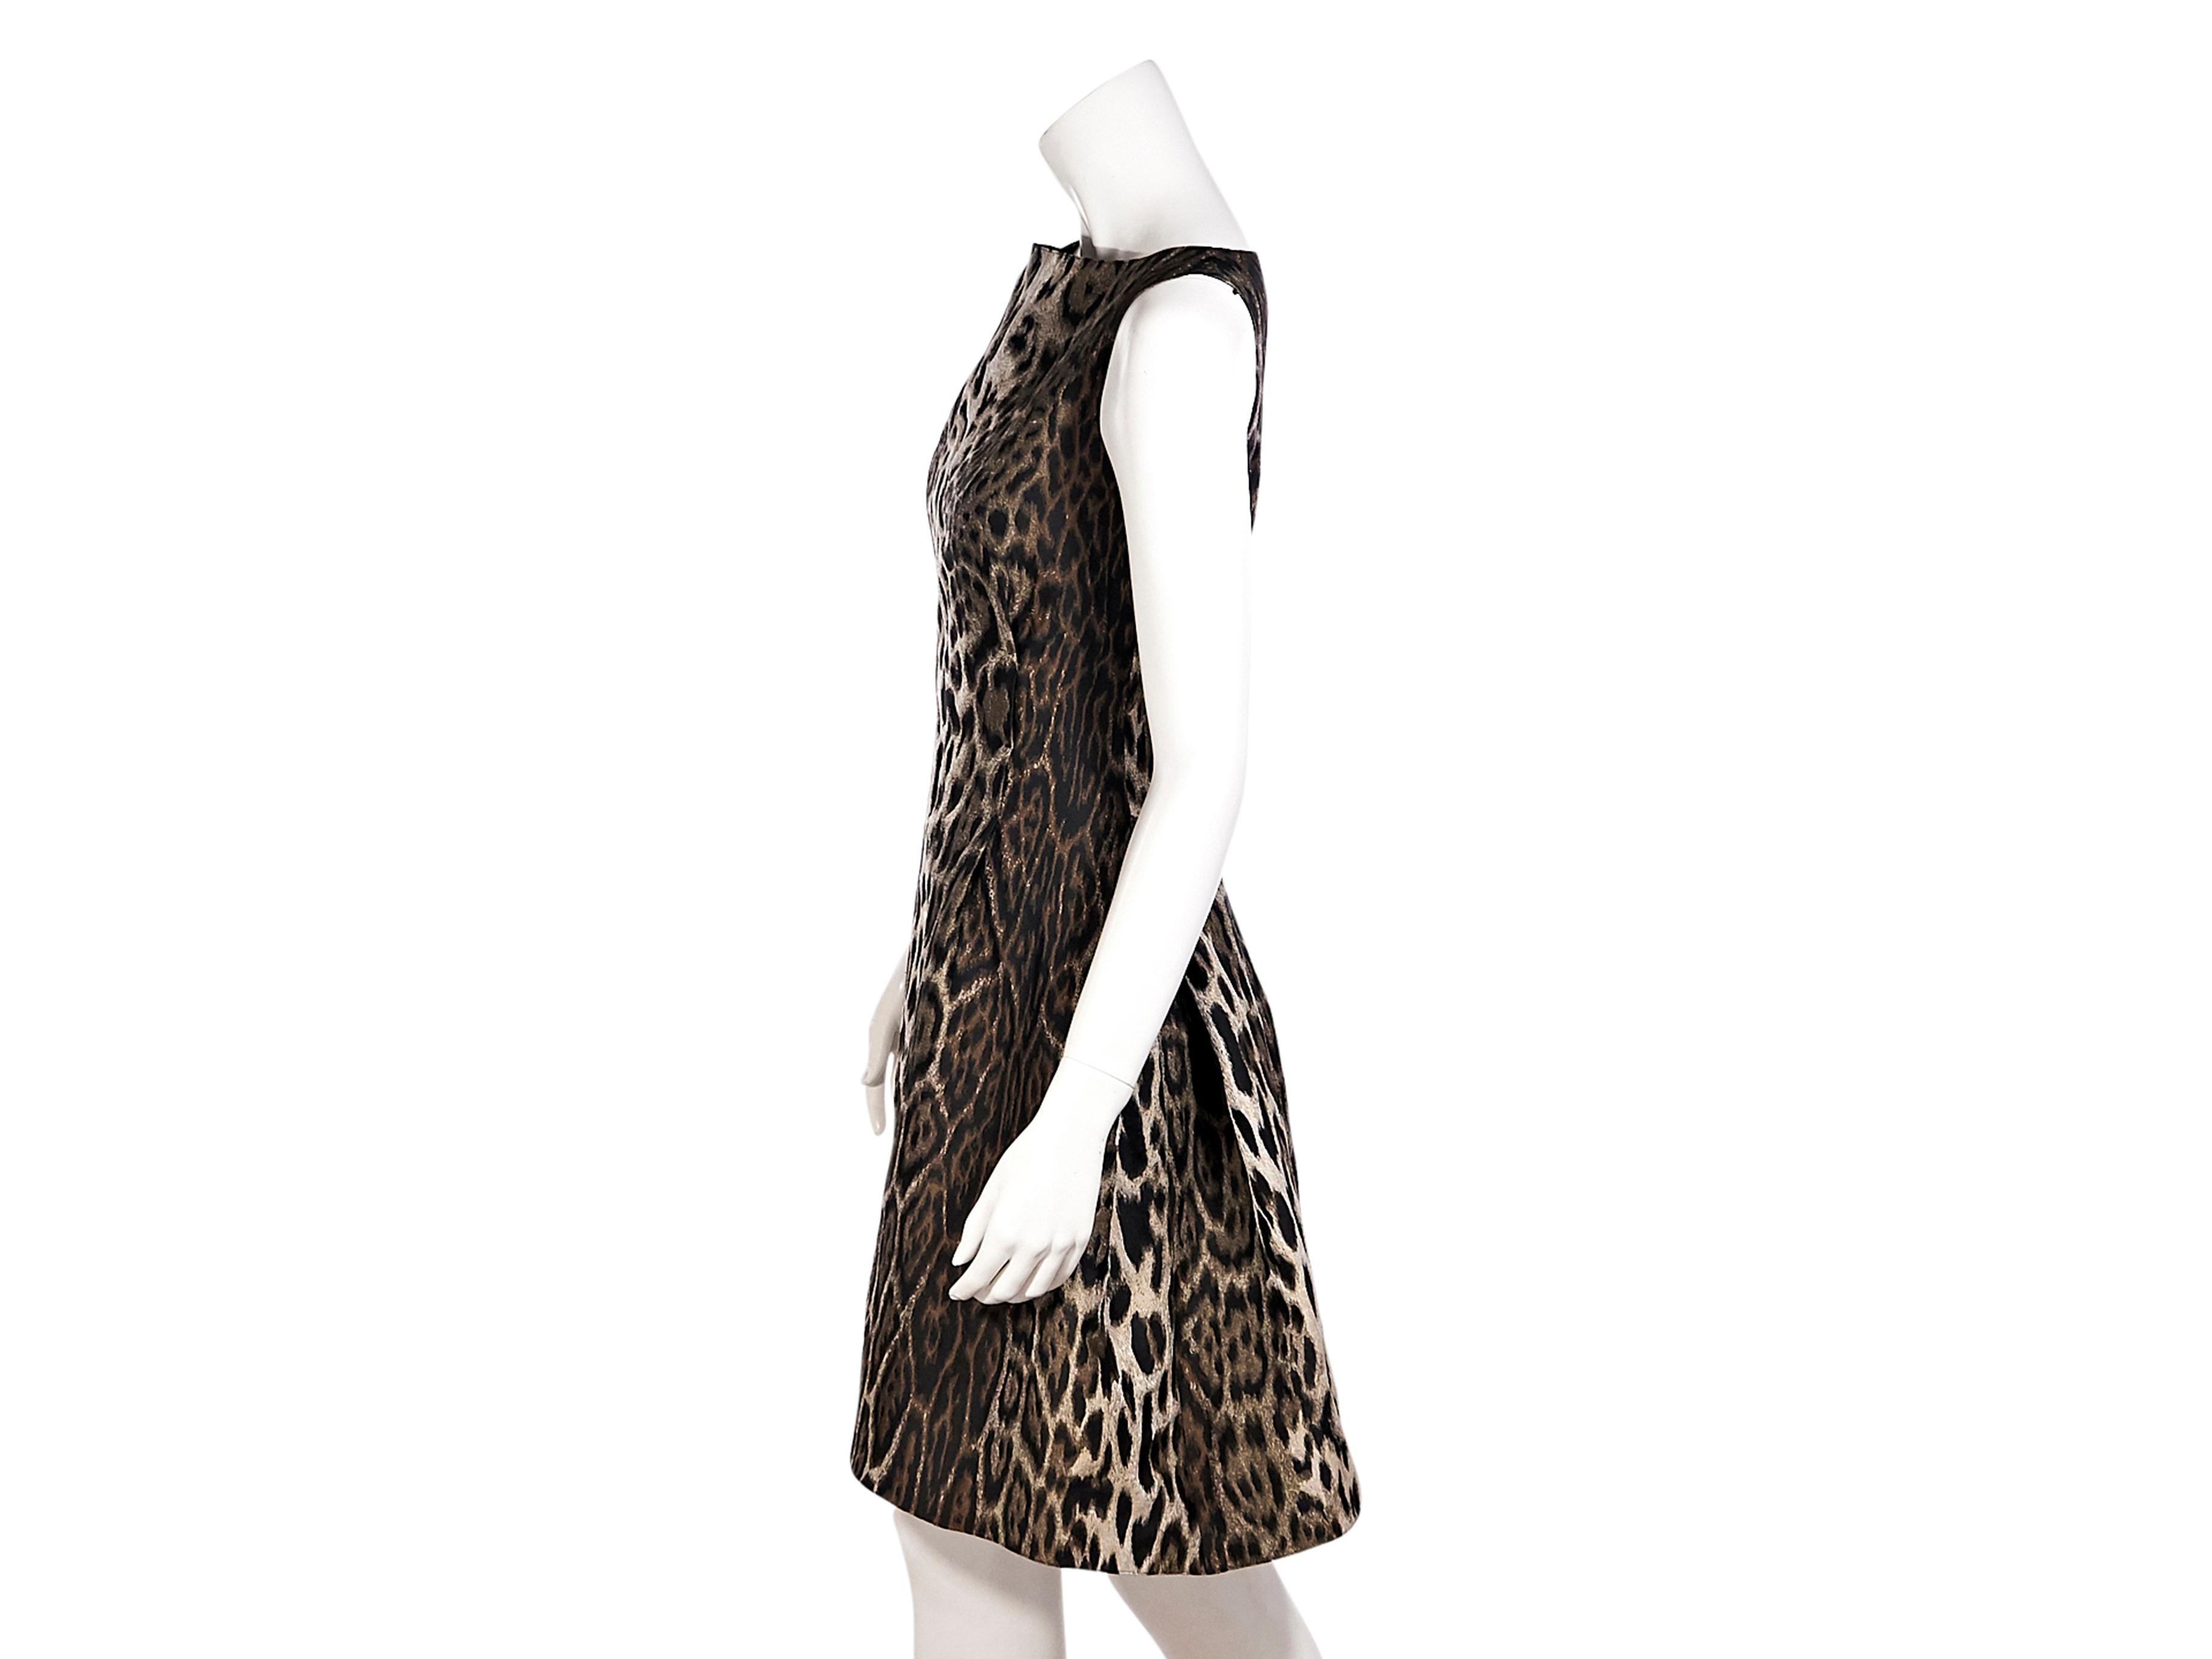 Product details:  Multicolor cheetah-printed party dress by Lanvin.  Boatneck.  Sleeveless.  Exposed back zip closure.  30